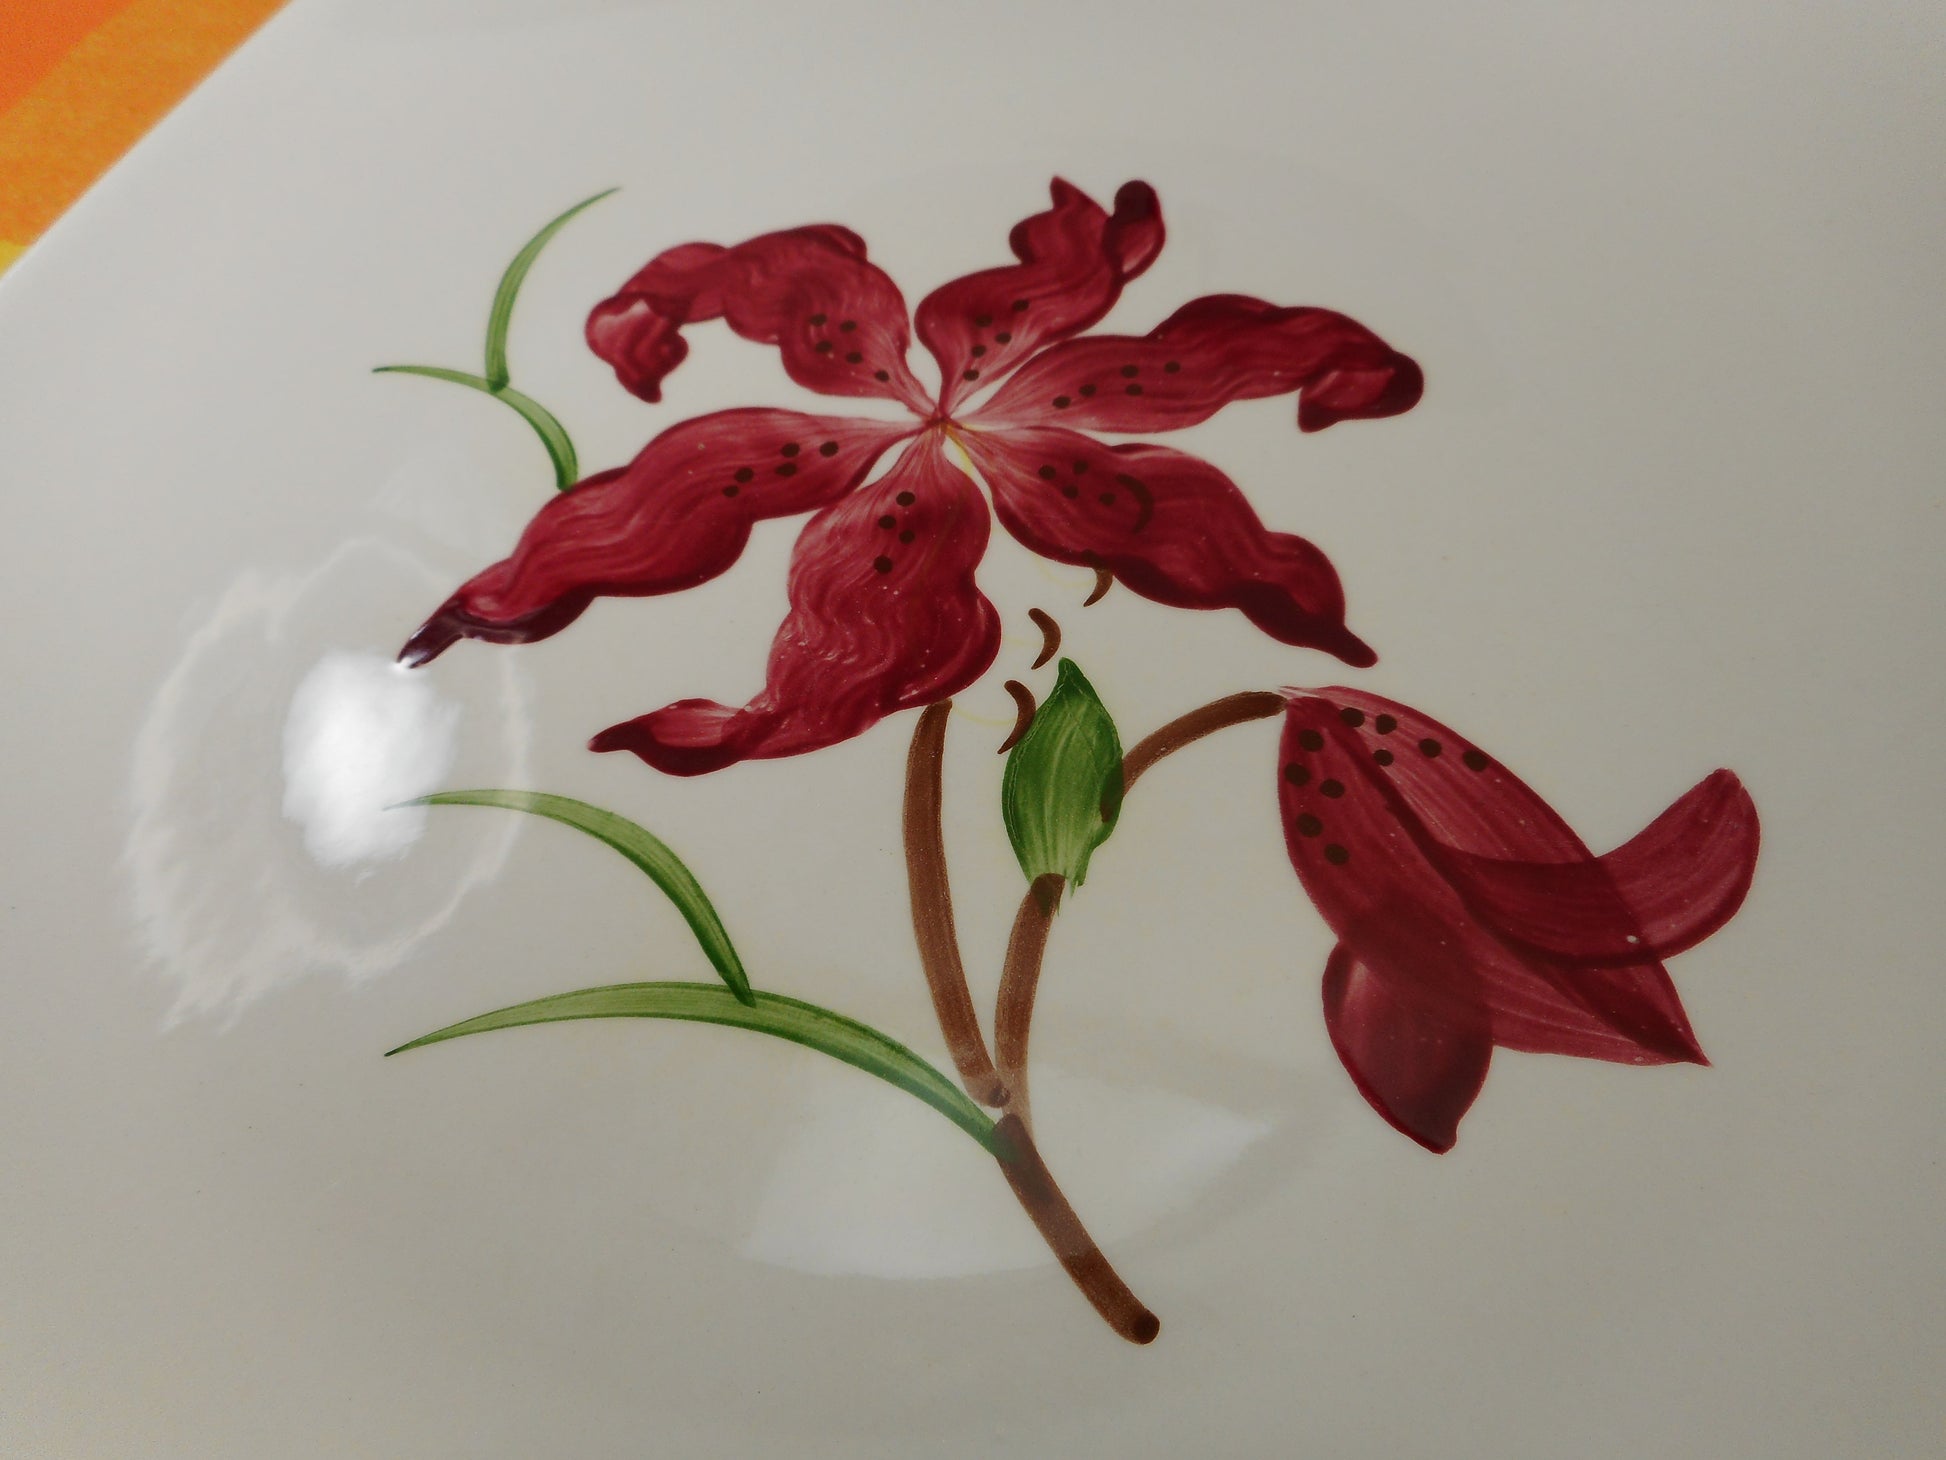 Orchard Ware California Pottery Red Lily Flower - Square Dinner Plate 9-7/8" White